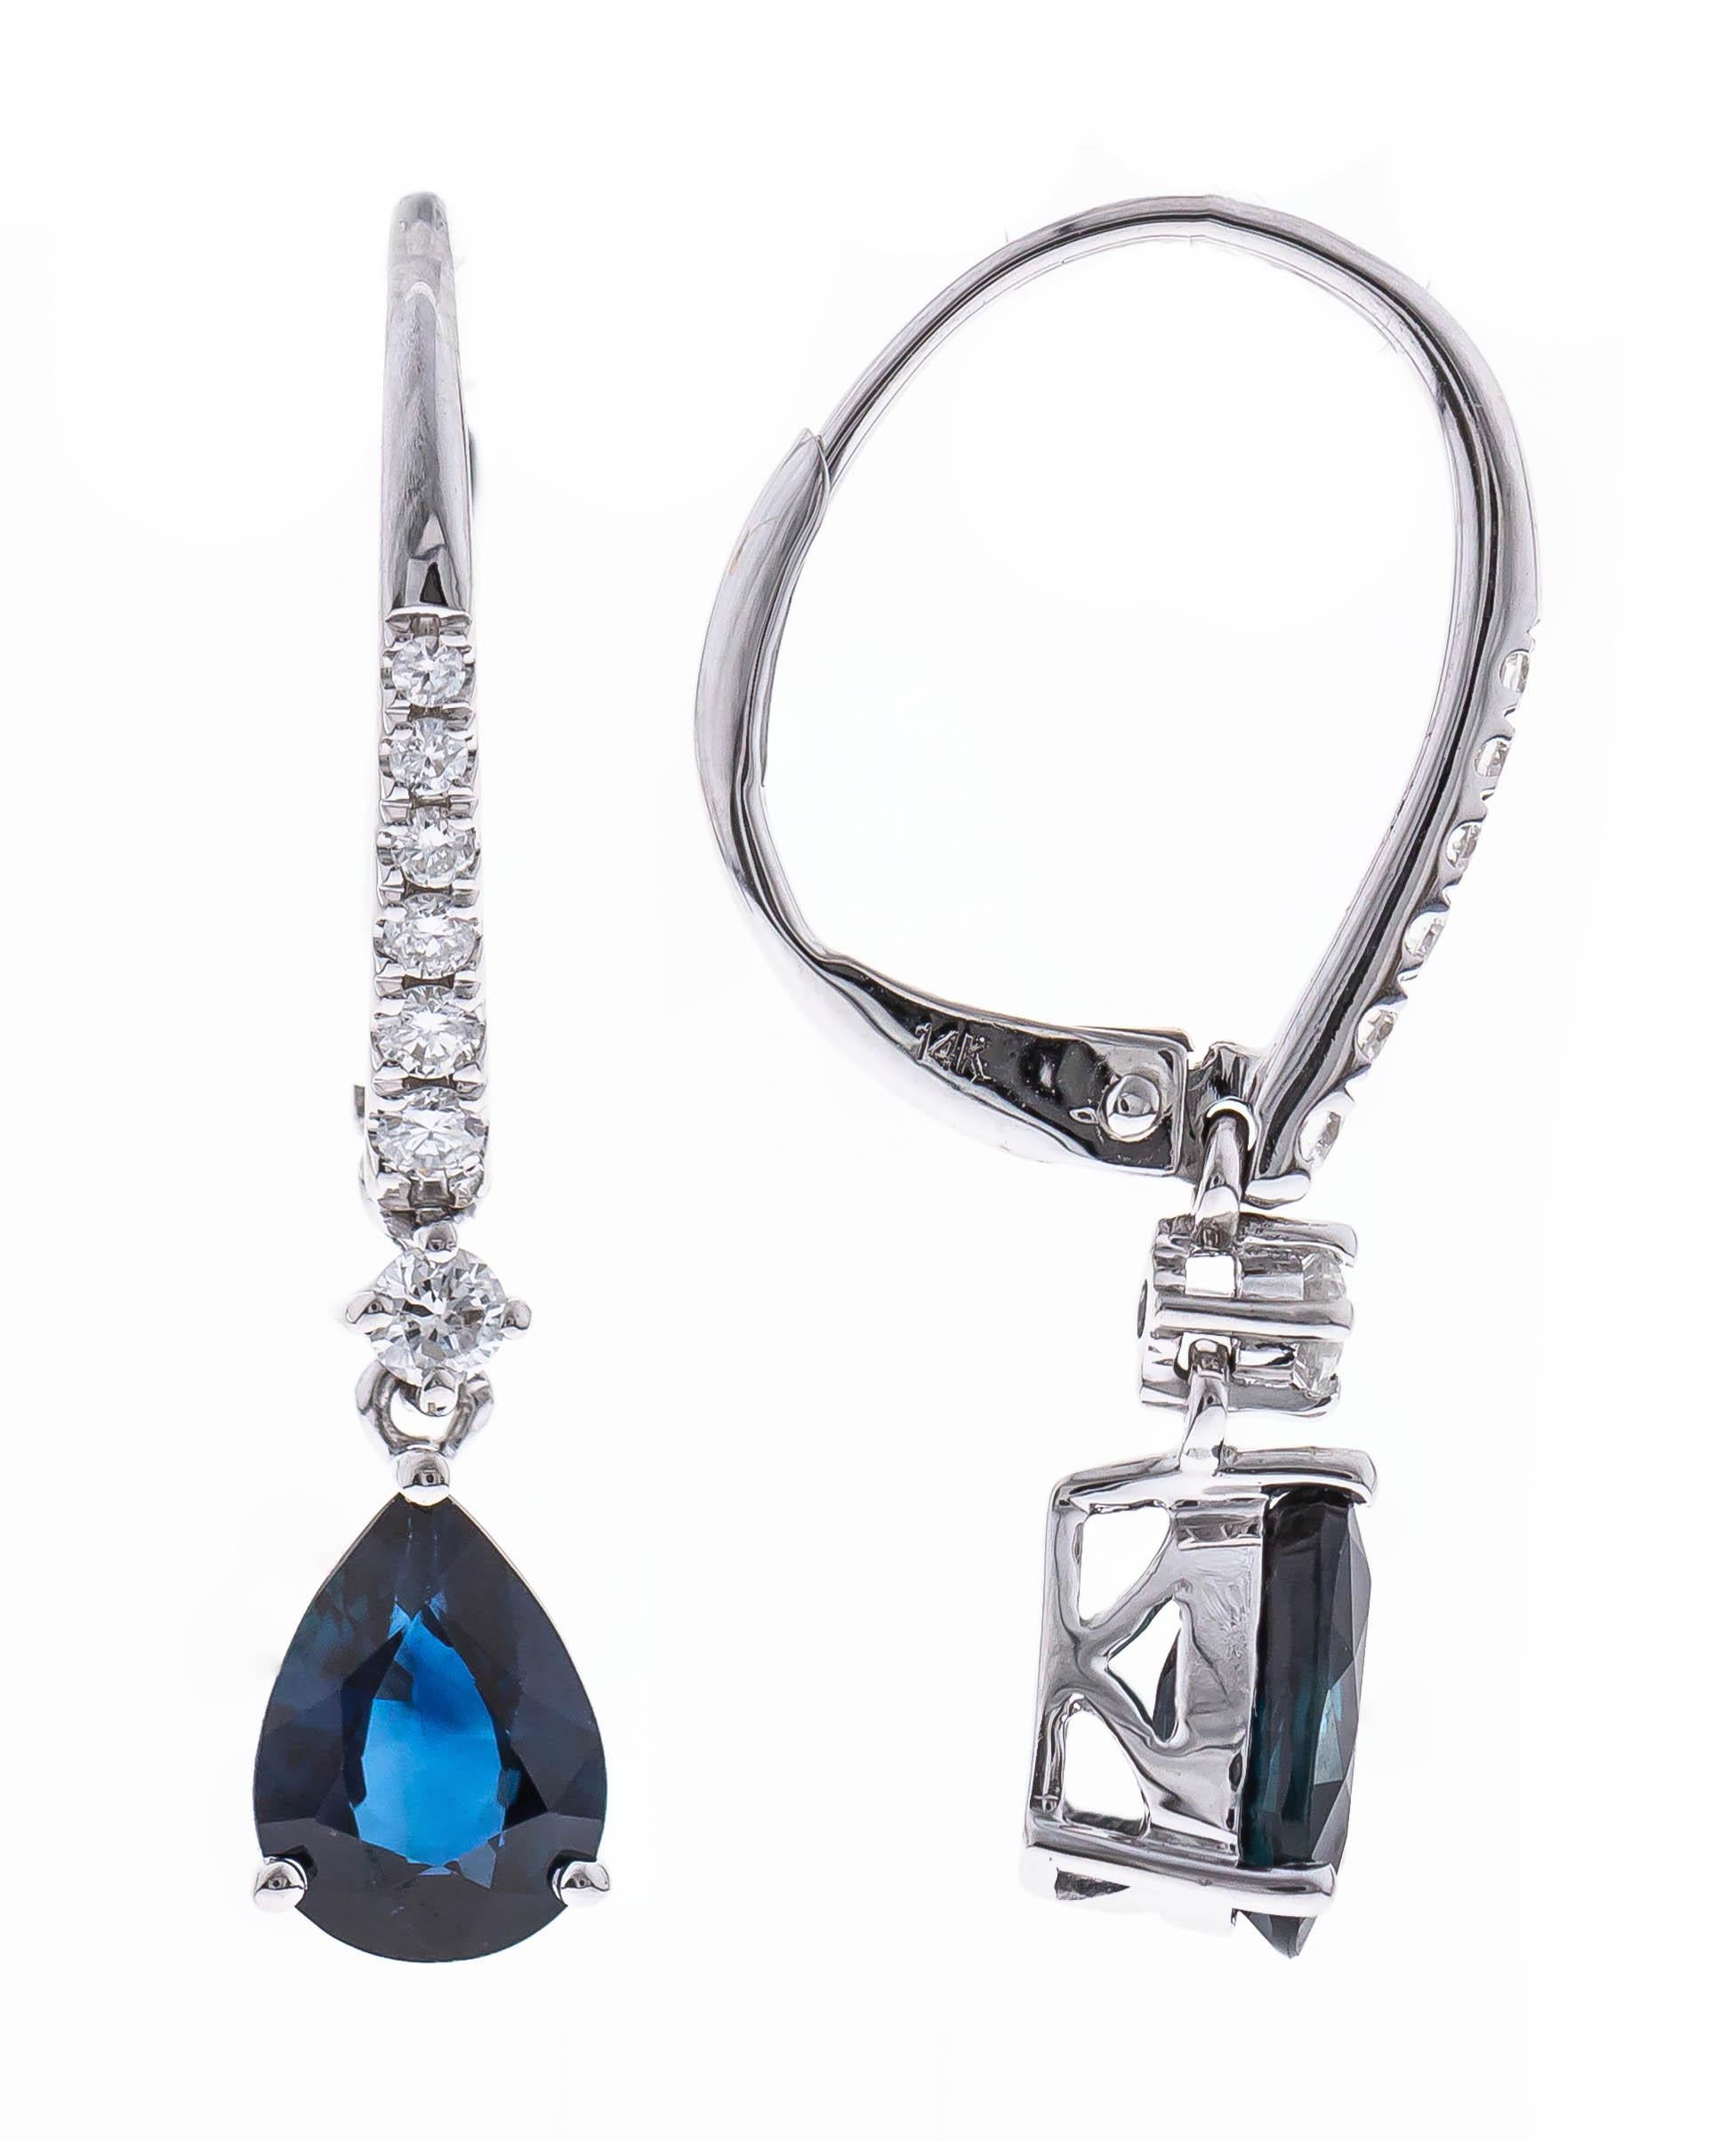 Decorate yourself in elegance with this Earring is crafted from 14-karat White Gold by Gin & Grace Earring. This Earring is made up of 7x5 mm Pear-cut (2pcs) 1.49 carat Blue Sapphire and Round-cut White Diamond (14 Pcs) 0.19 Carat. This Earring is